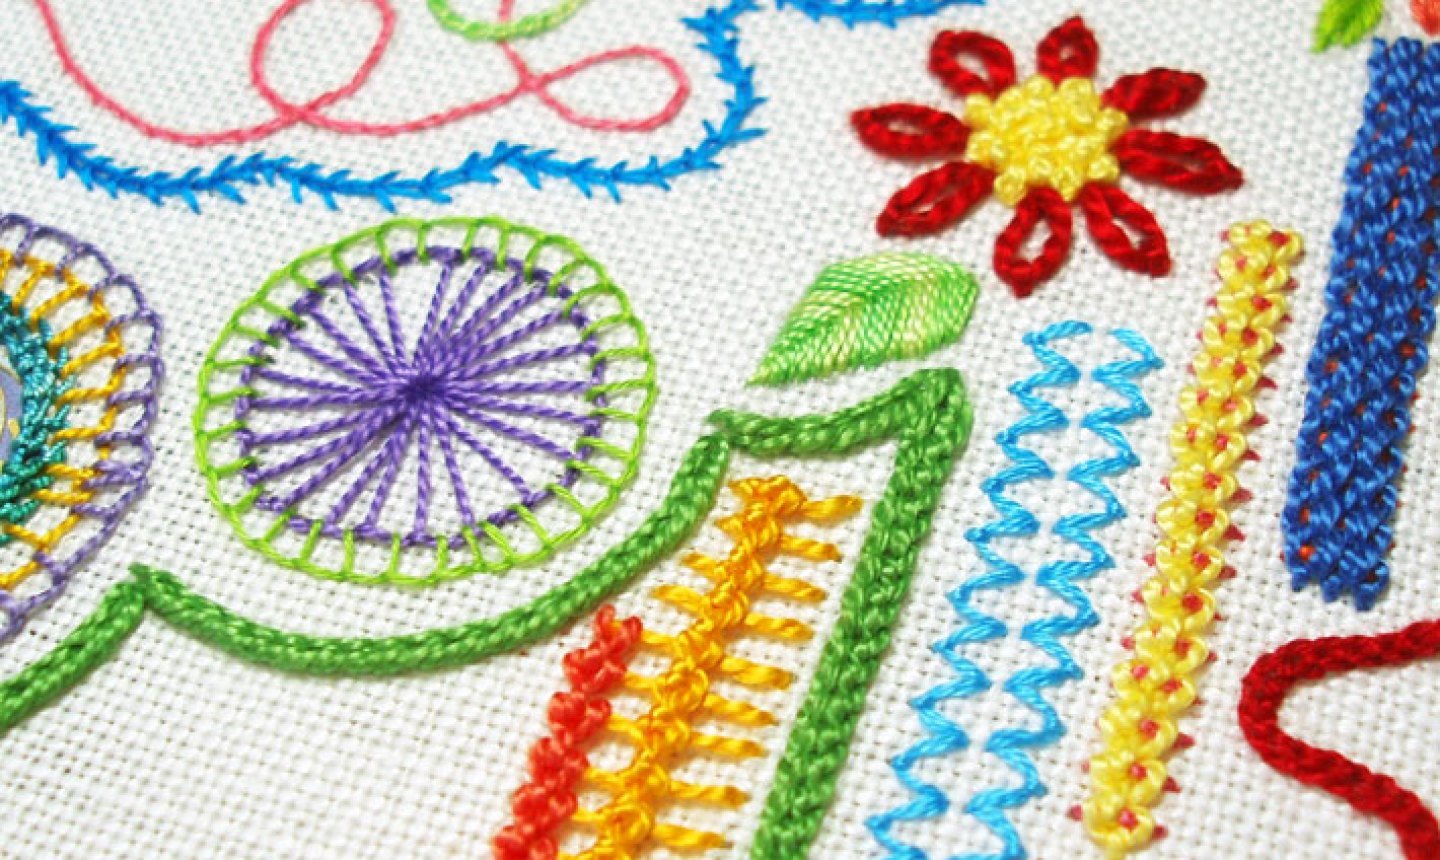 detail of embroidery sampler